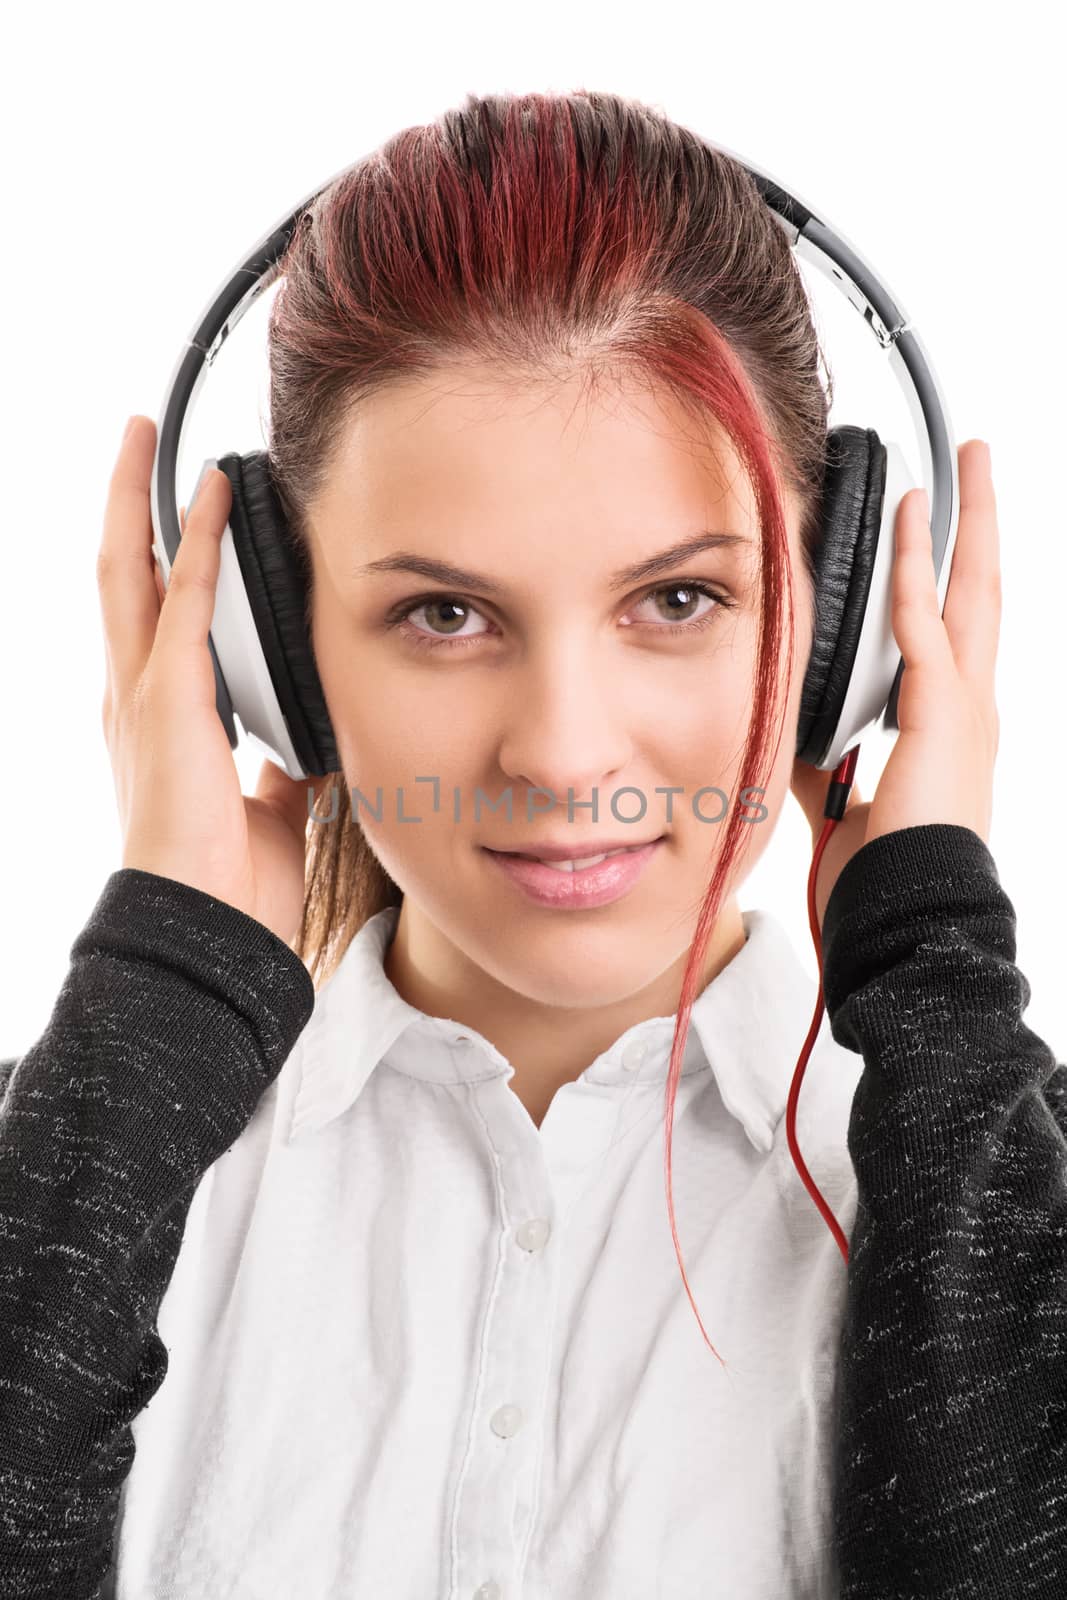 Shh, I am listening to my favorite song. Beautiful young girl with headphones listening to music, isolated on white background.